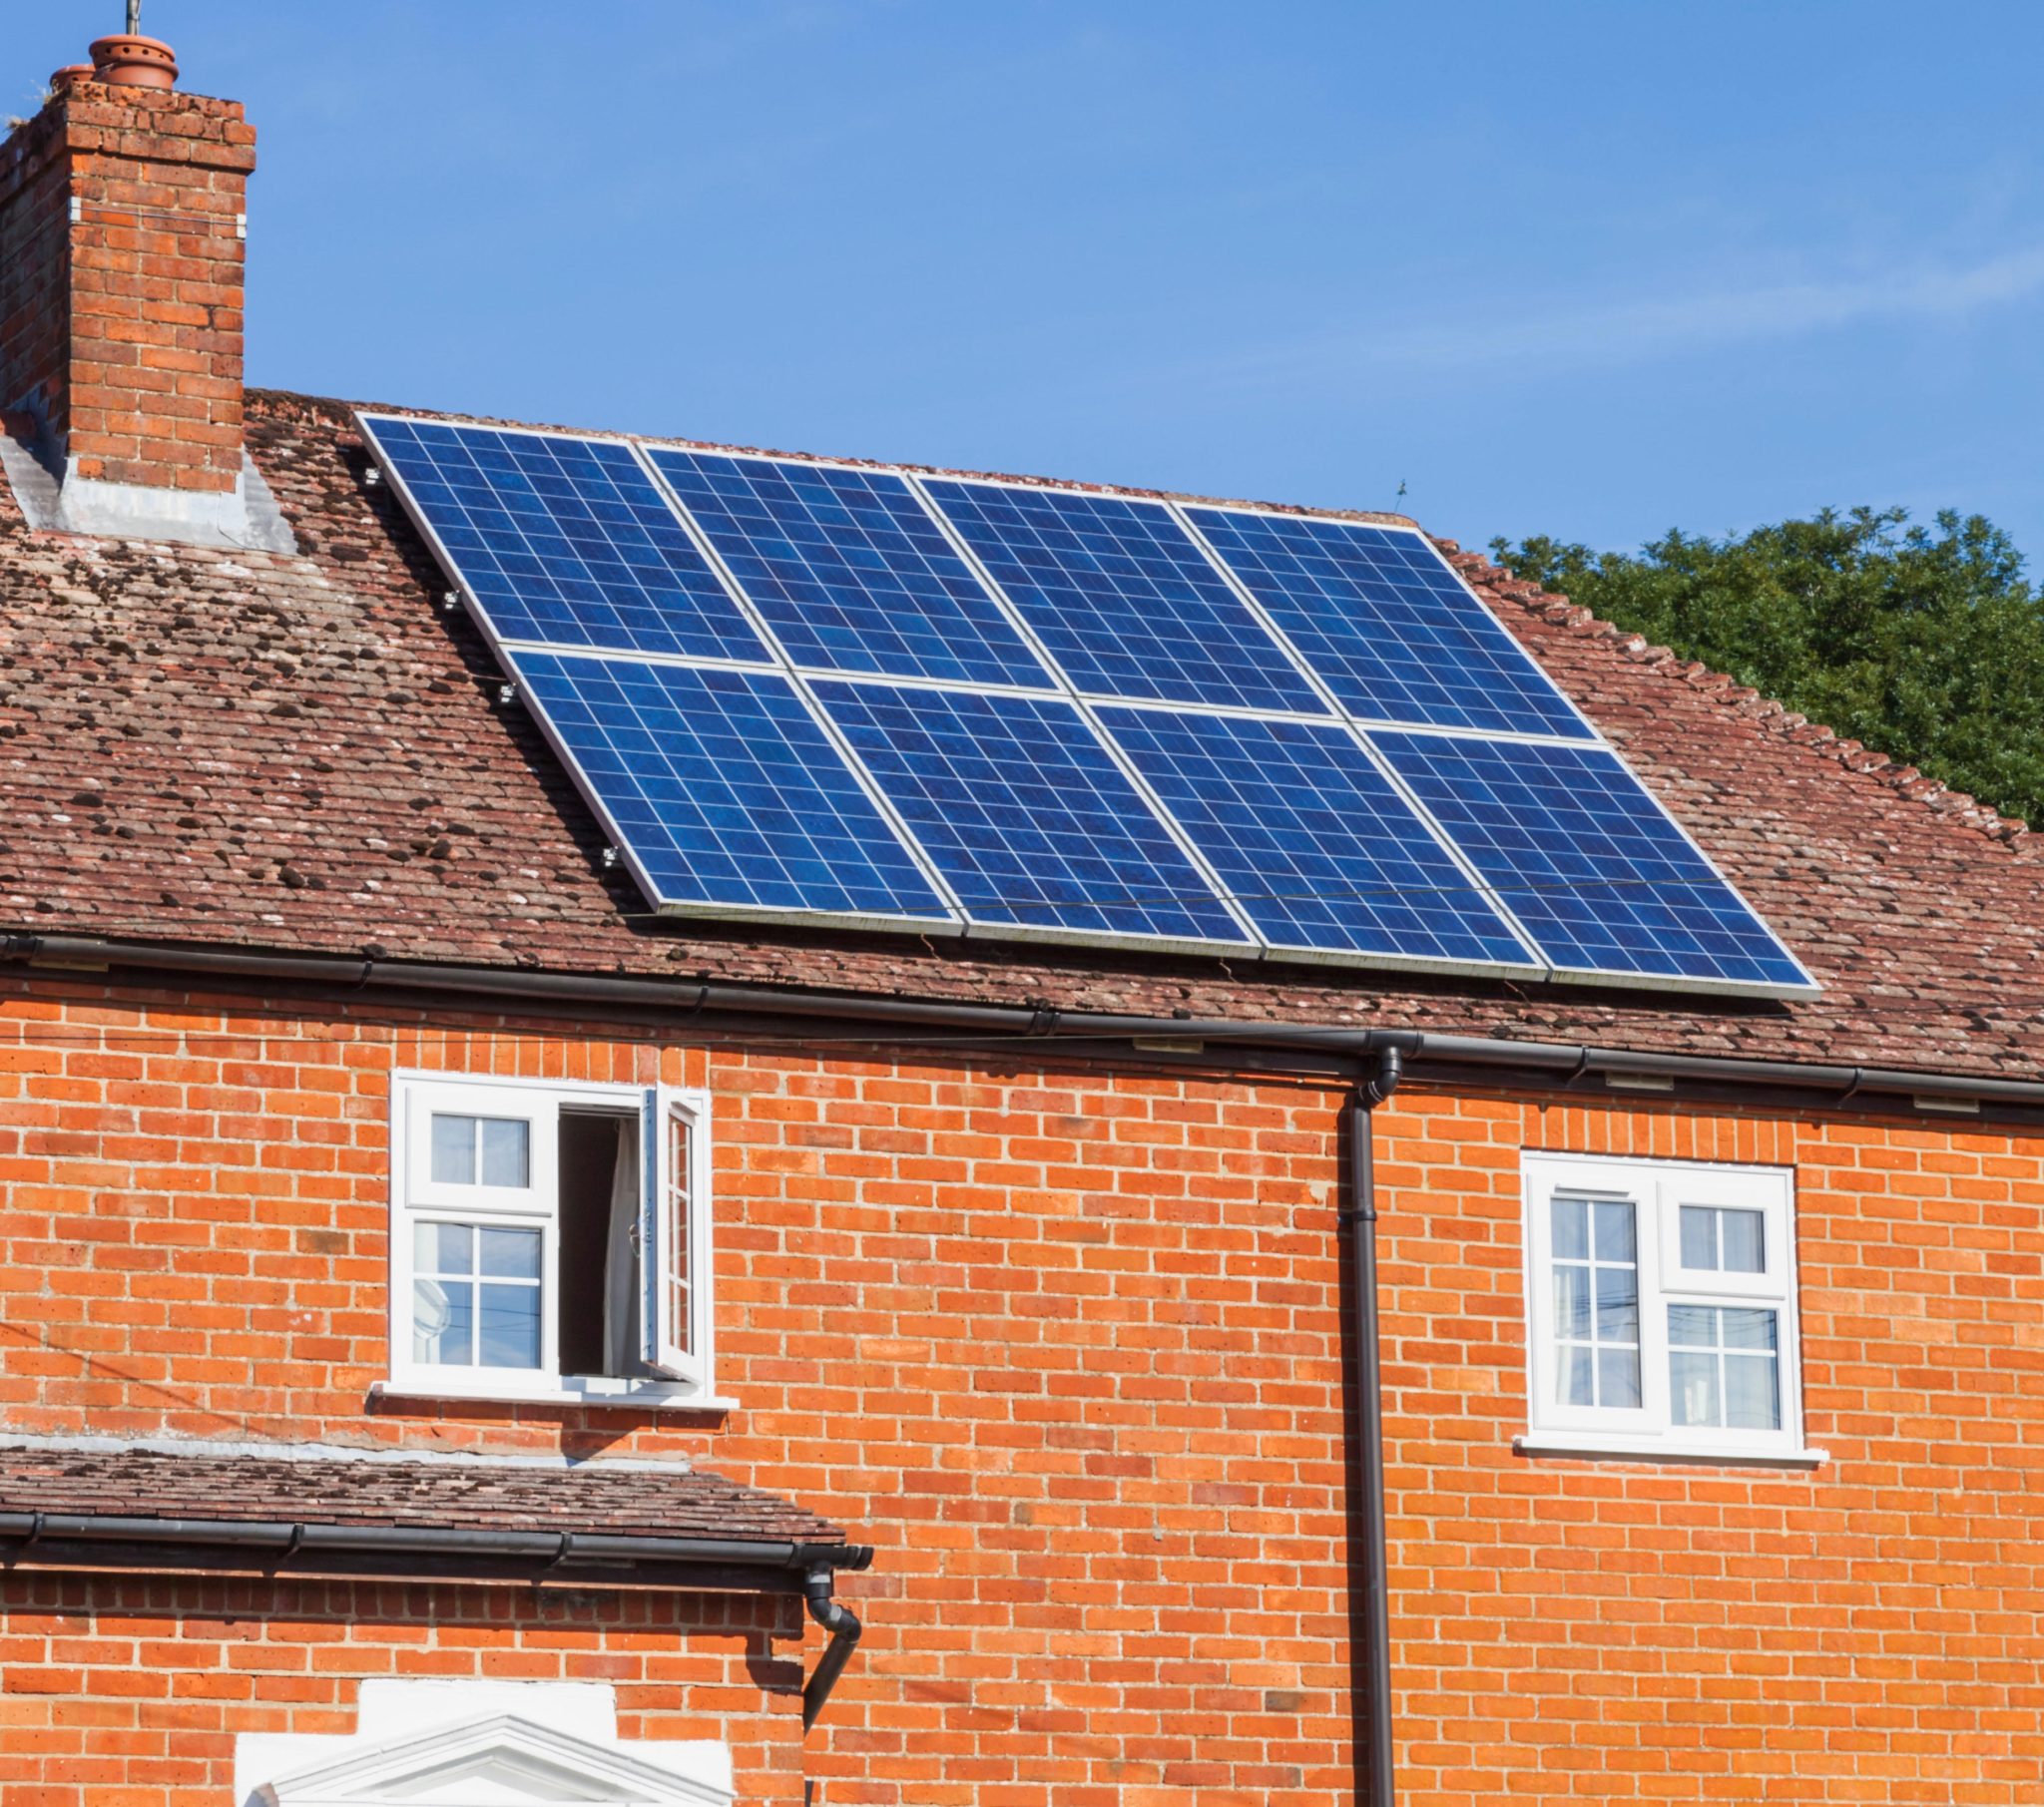 Rooftop solar panels are seen on a house in England, UK in August 2015.